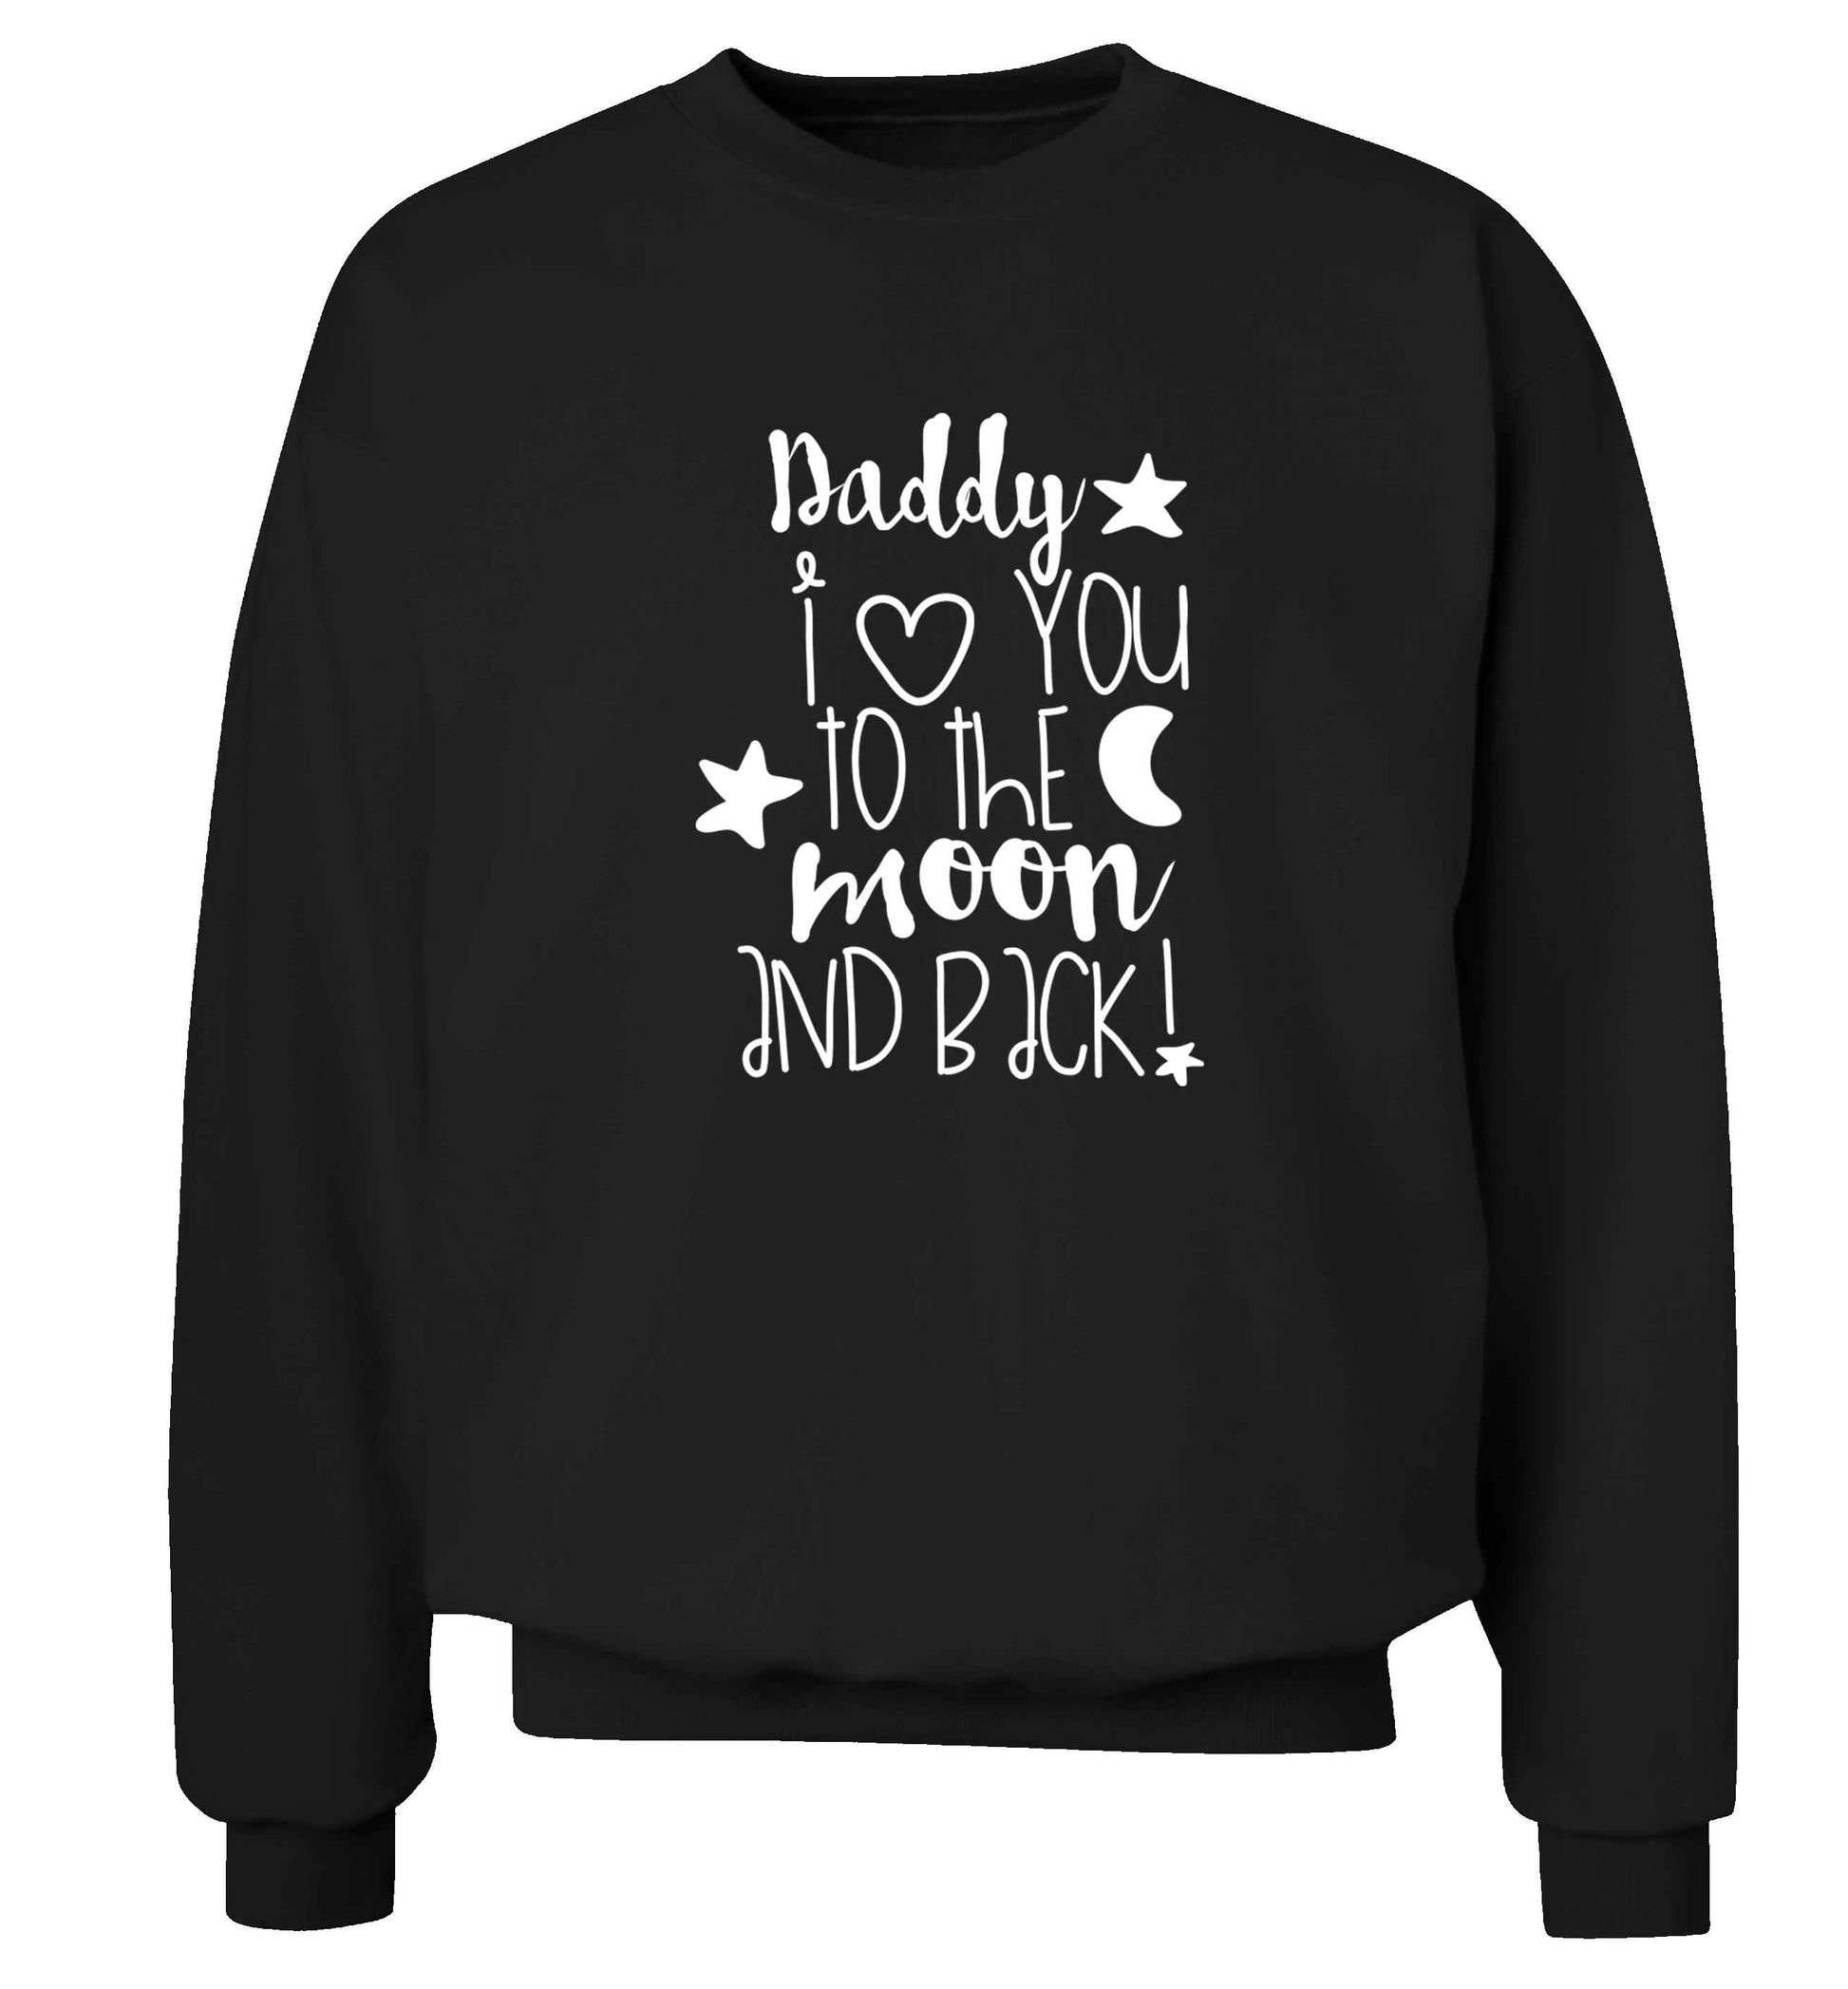 Daddy I love you to the moon and back adult's unisex black sweater 2XL